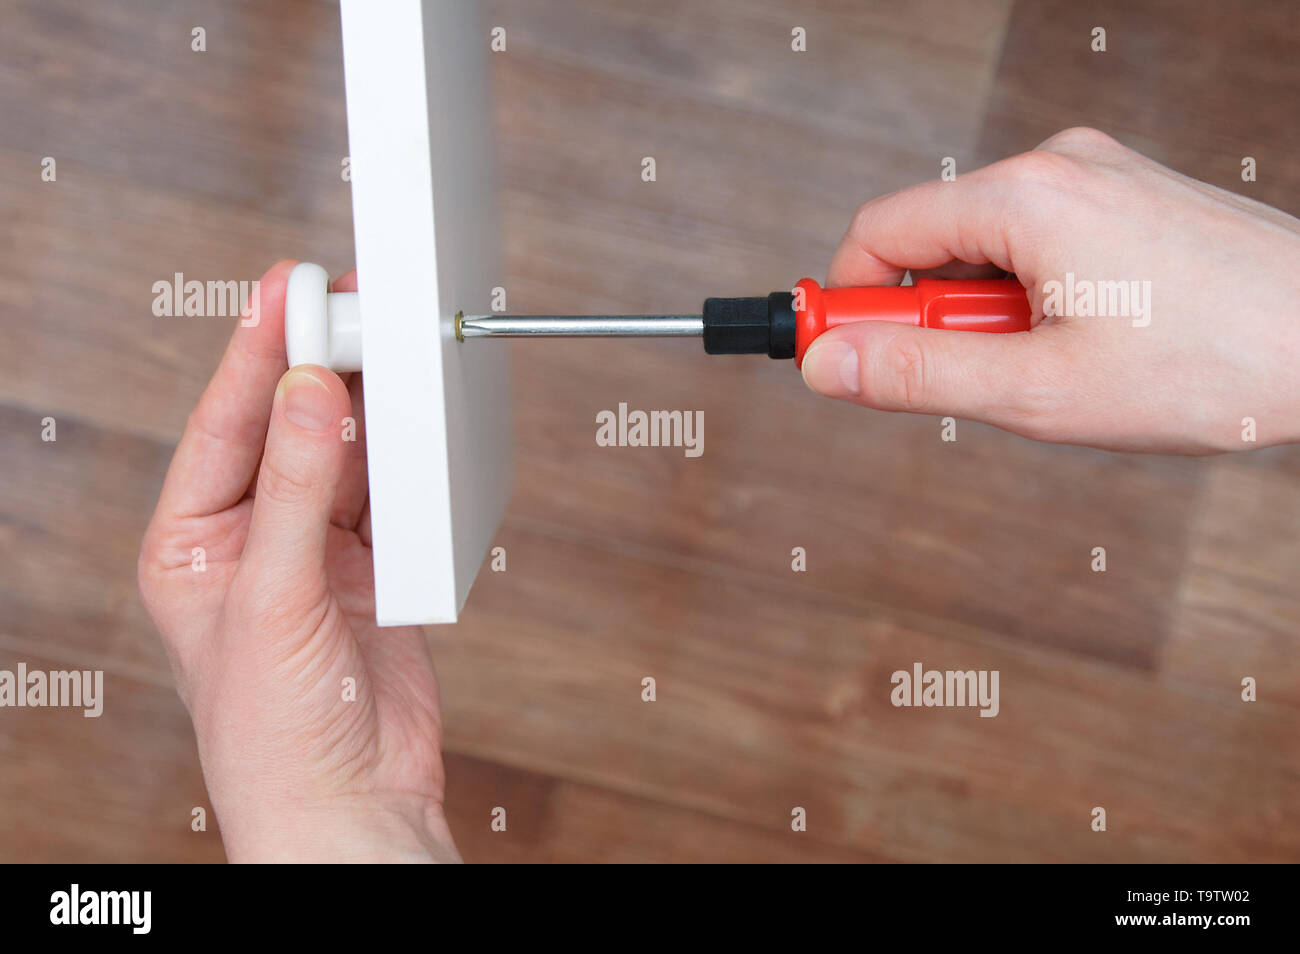 Furniture assembly. Hands of the girl close up. A screwdriver fastens the white knob to the cabinet door. Stock Photo